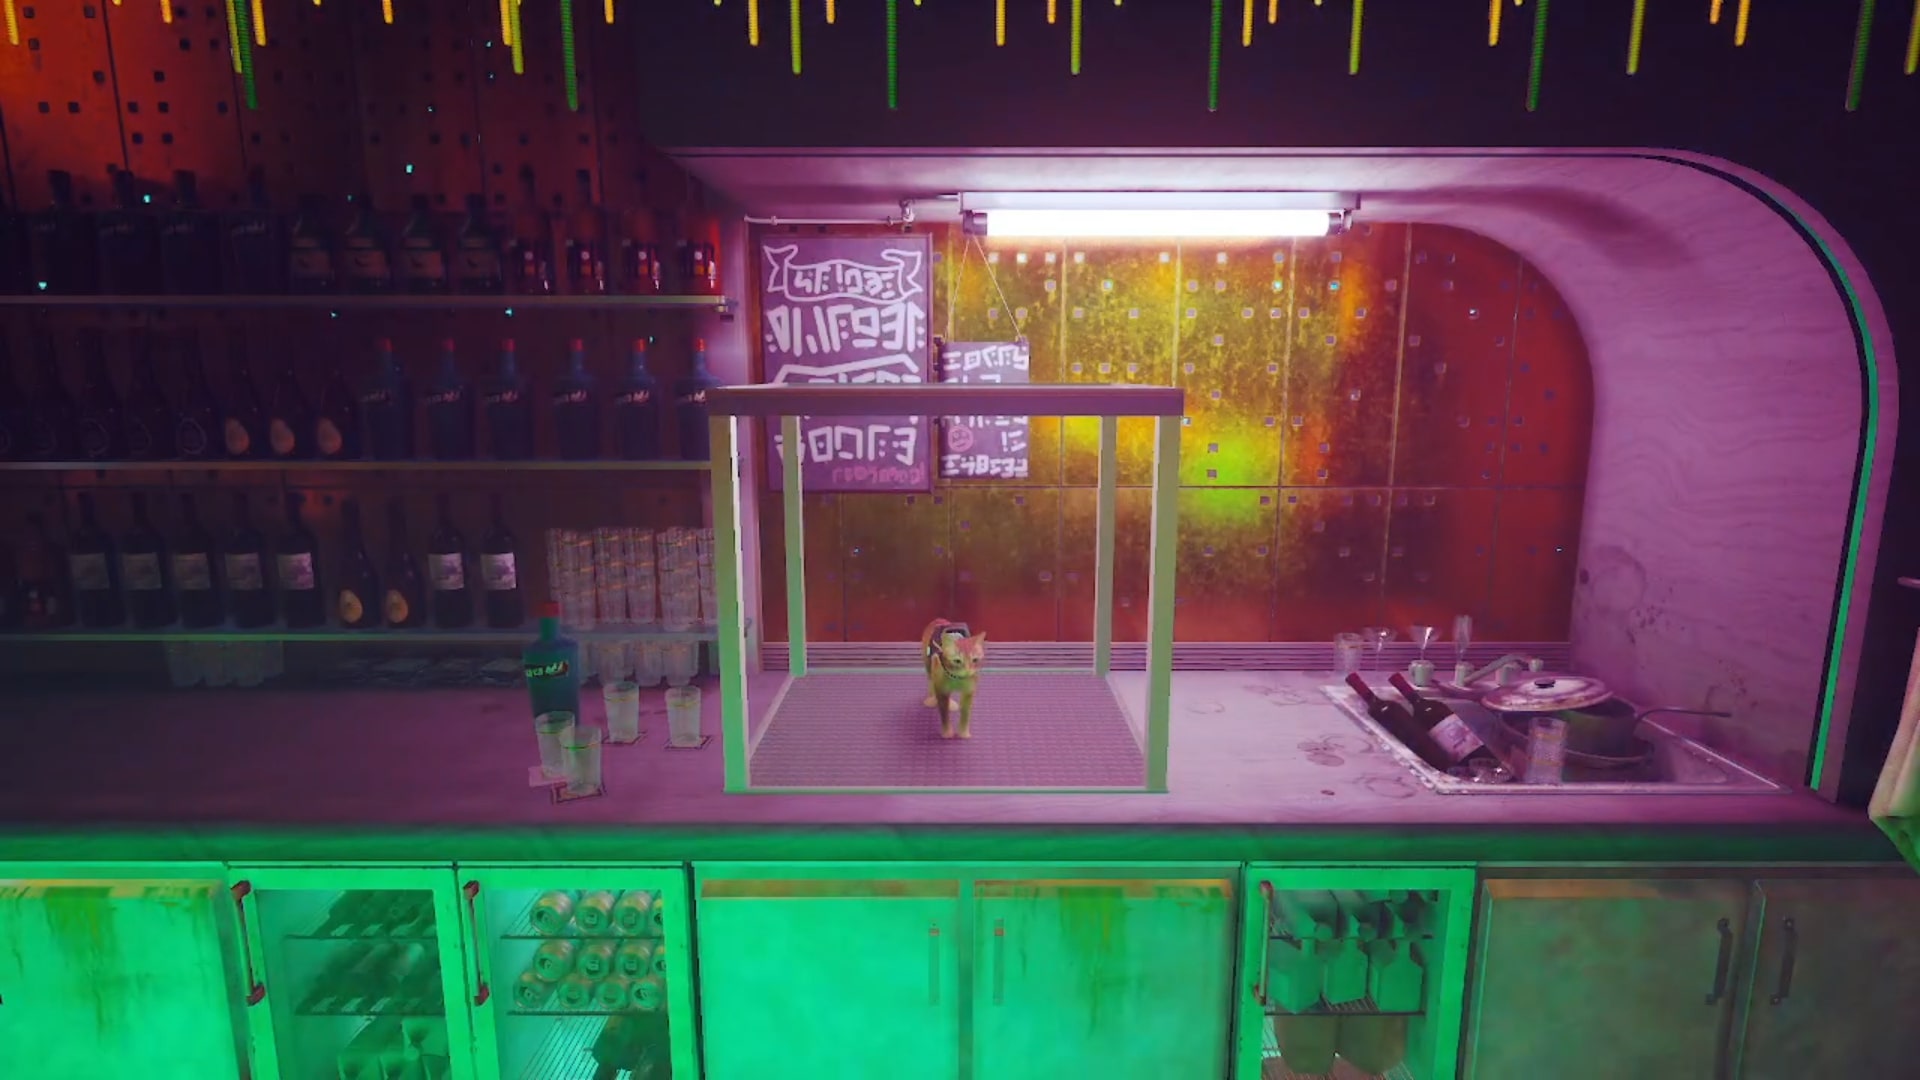 Stray memories guide: The eponymous stray stands in a dumbwaiter that's in the middle of a back bar surrounded by glasses, bottles of alcohol, and a sink overflowing with dishes